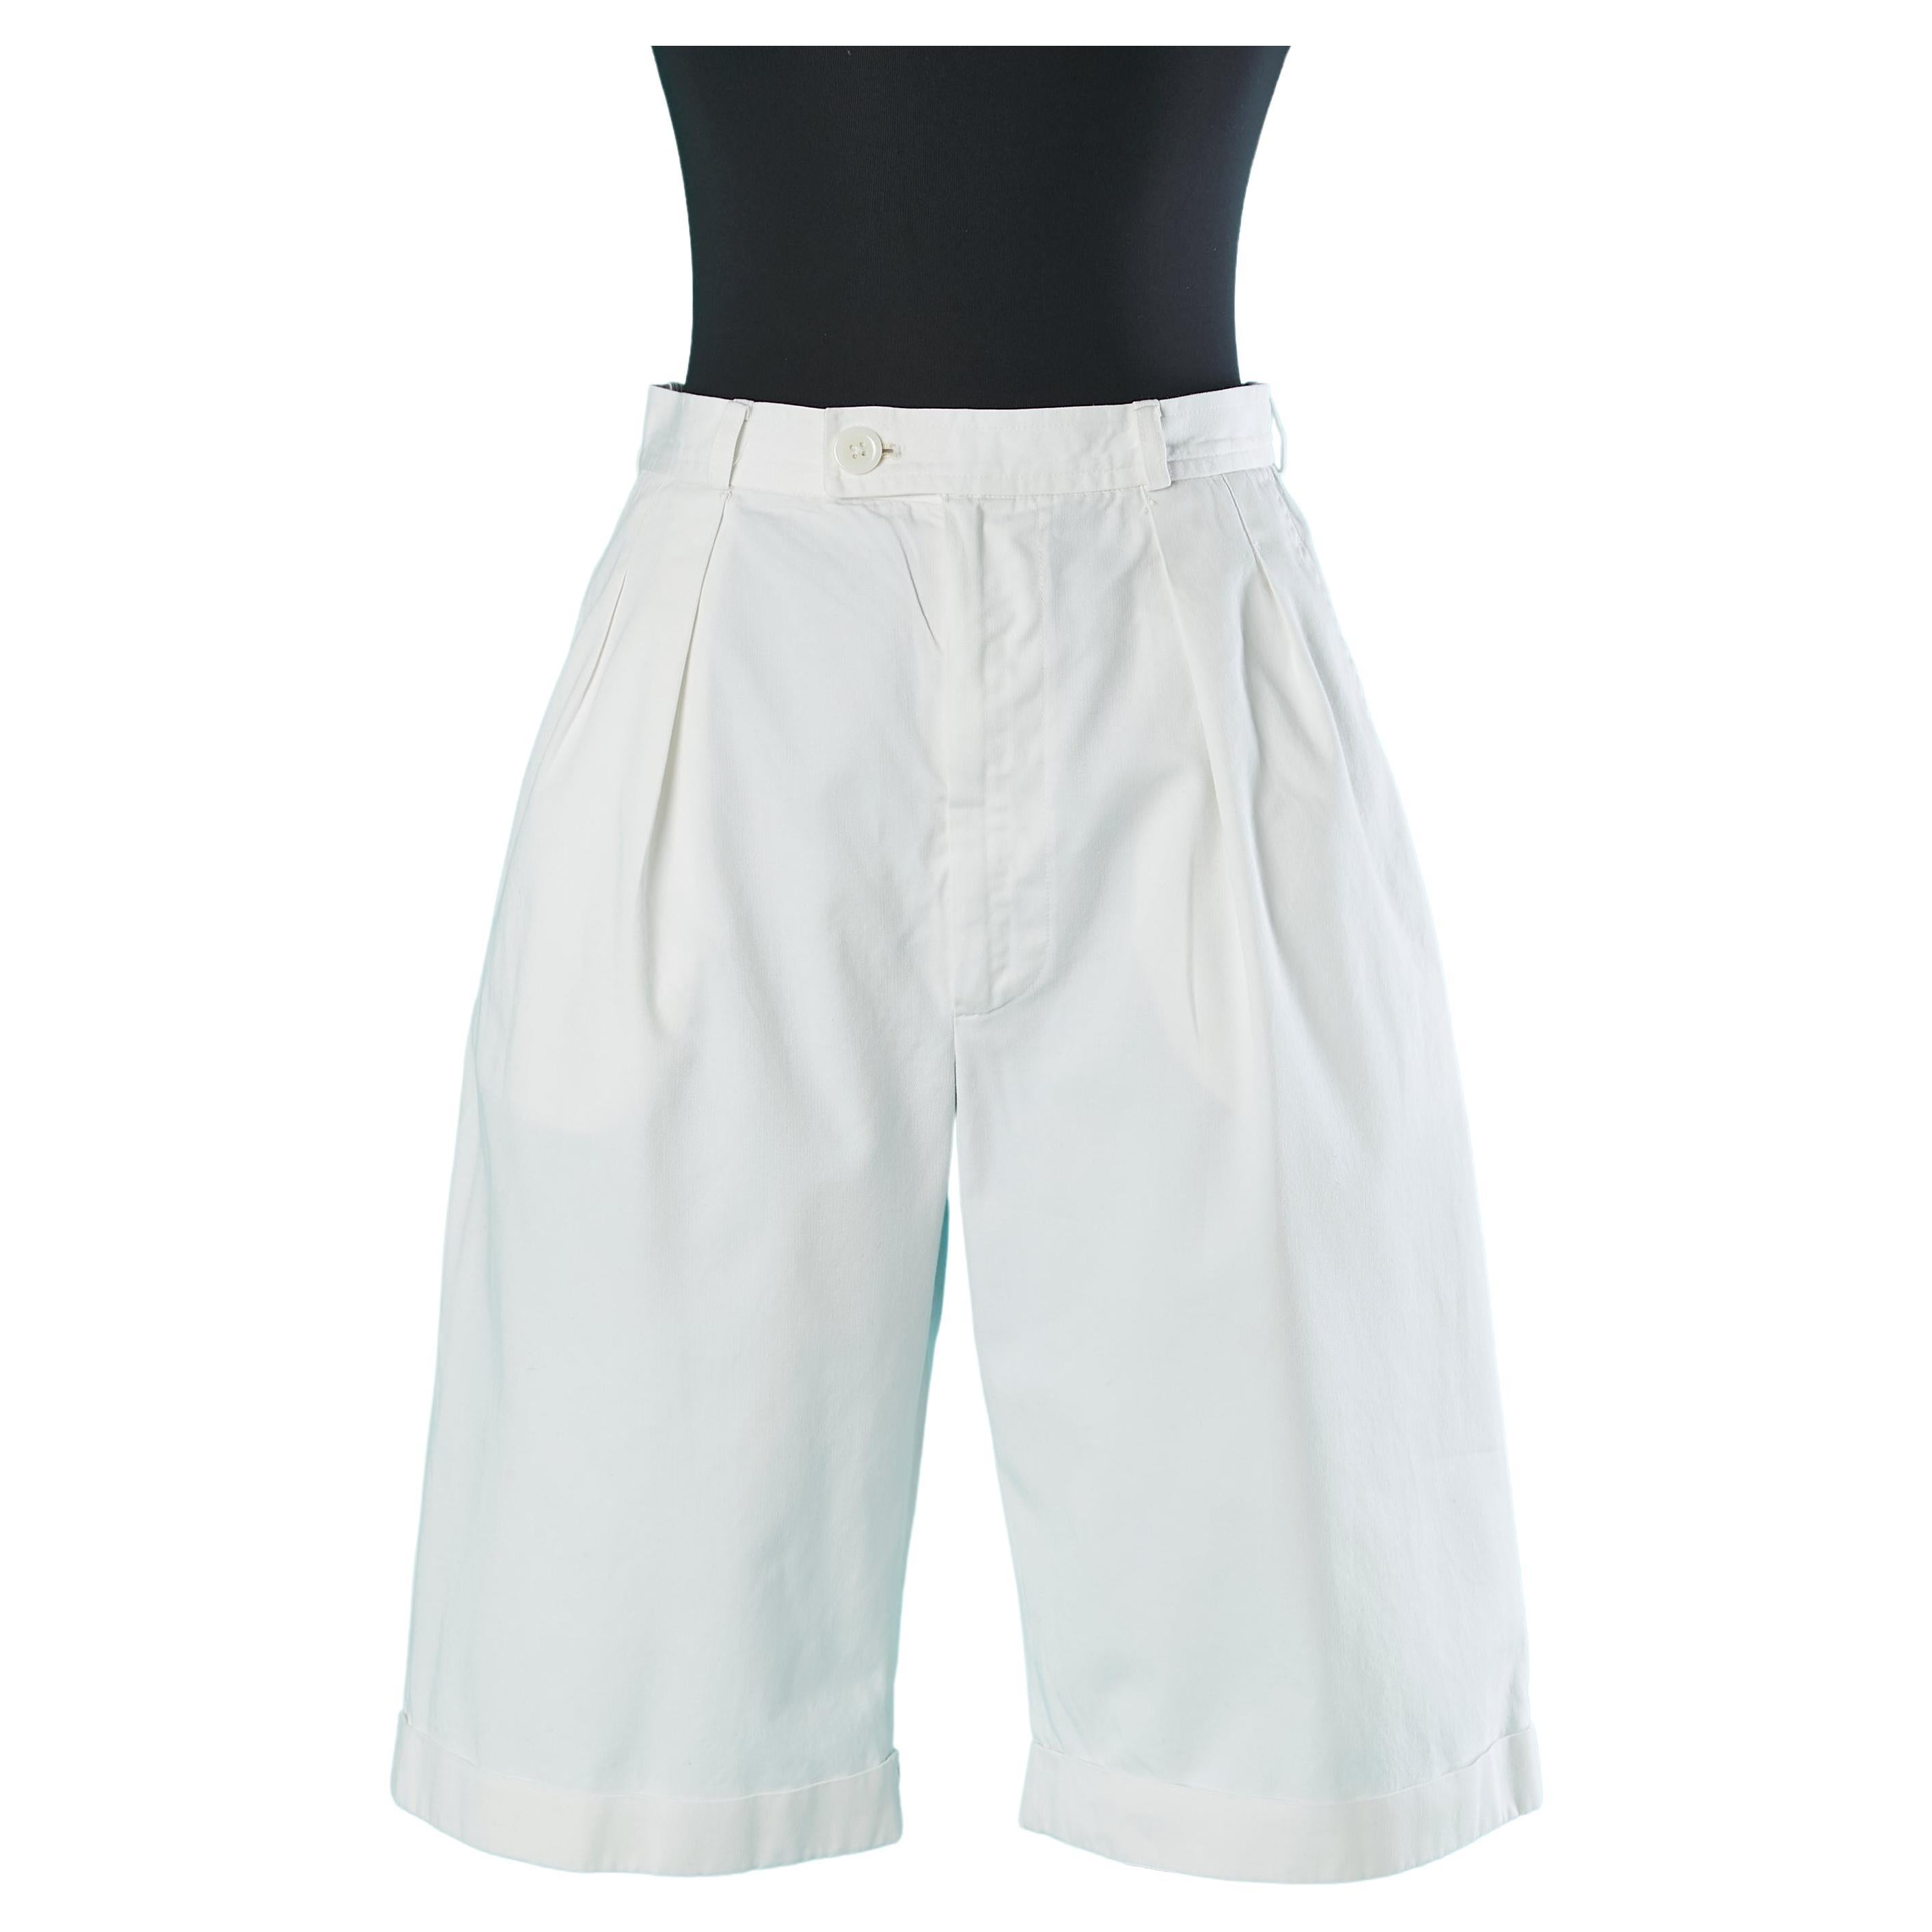 White cotton bermuda with pockets on both side Saint Laurent Rive Gauche 